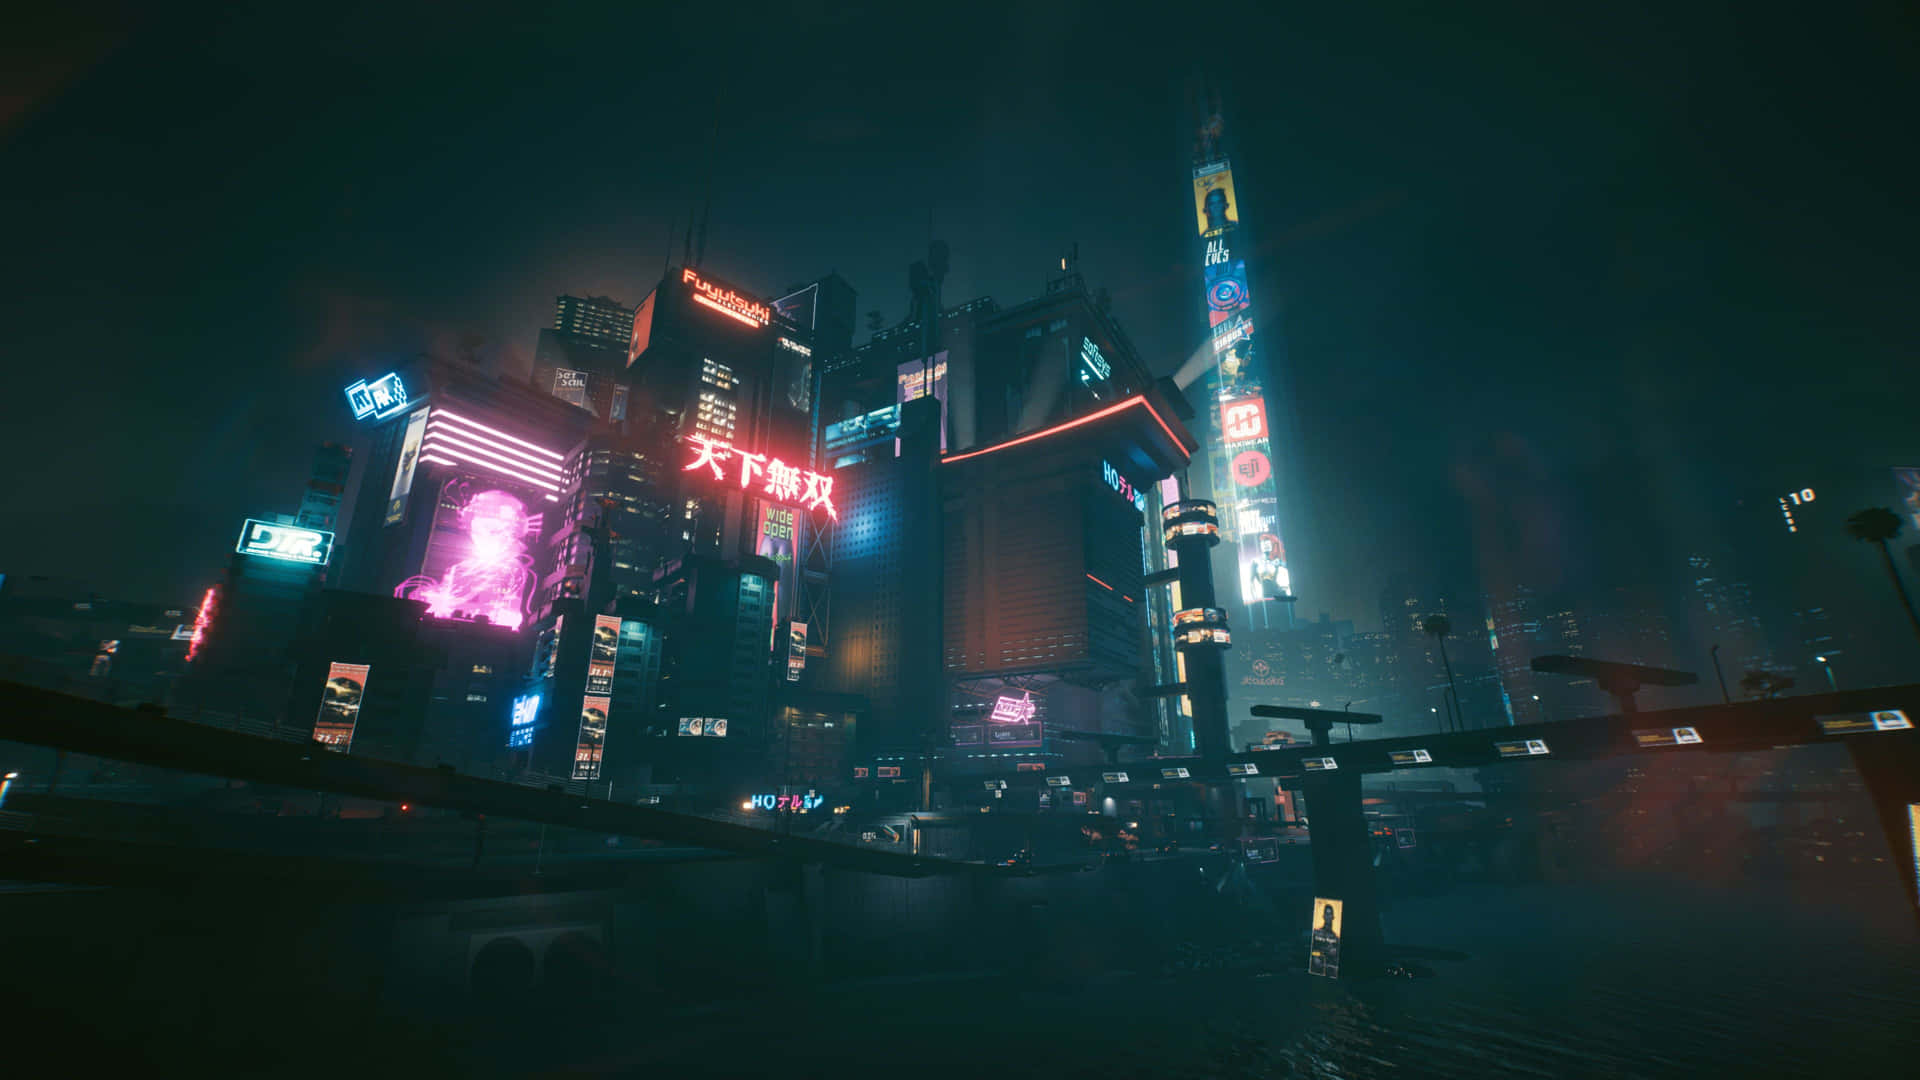 Glimpse the future- Neon lights and megacorporations tower over a cyberpunk inspired Night City. Wallpaper